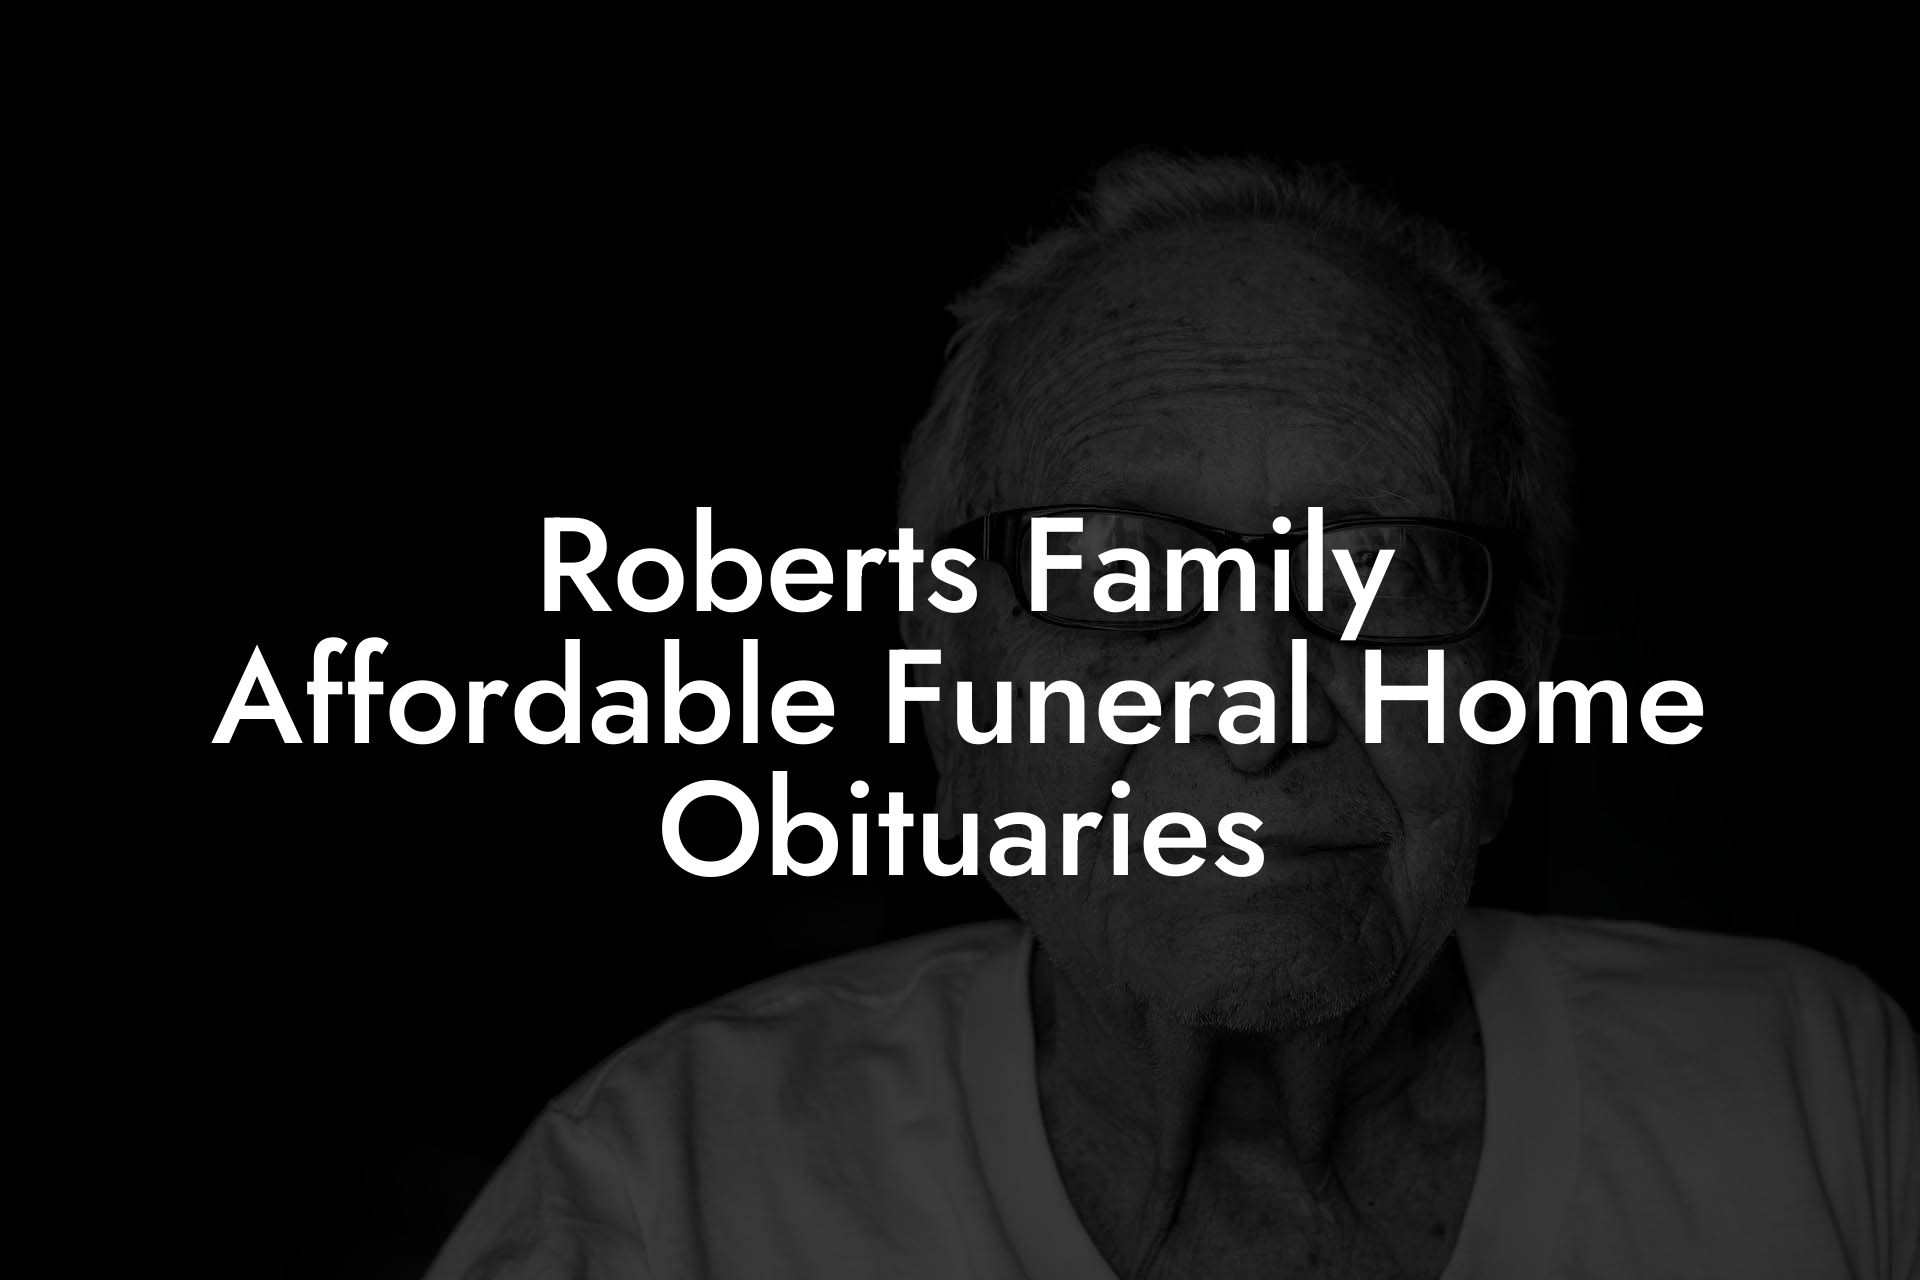 Roberts Family Affordable Funeral Home Obituaries